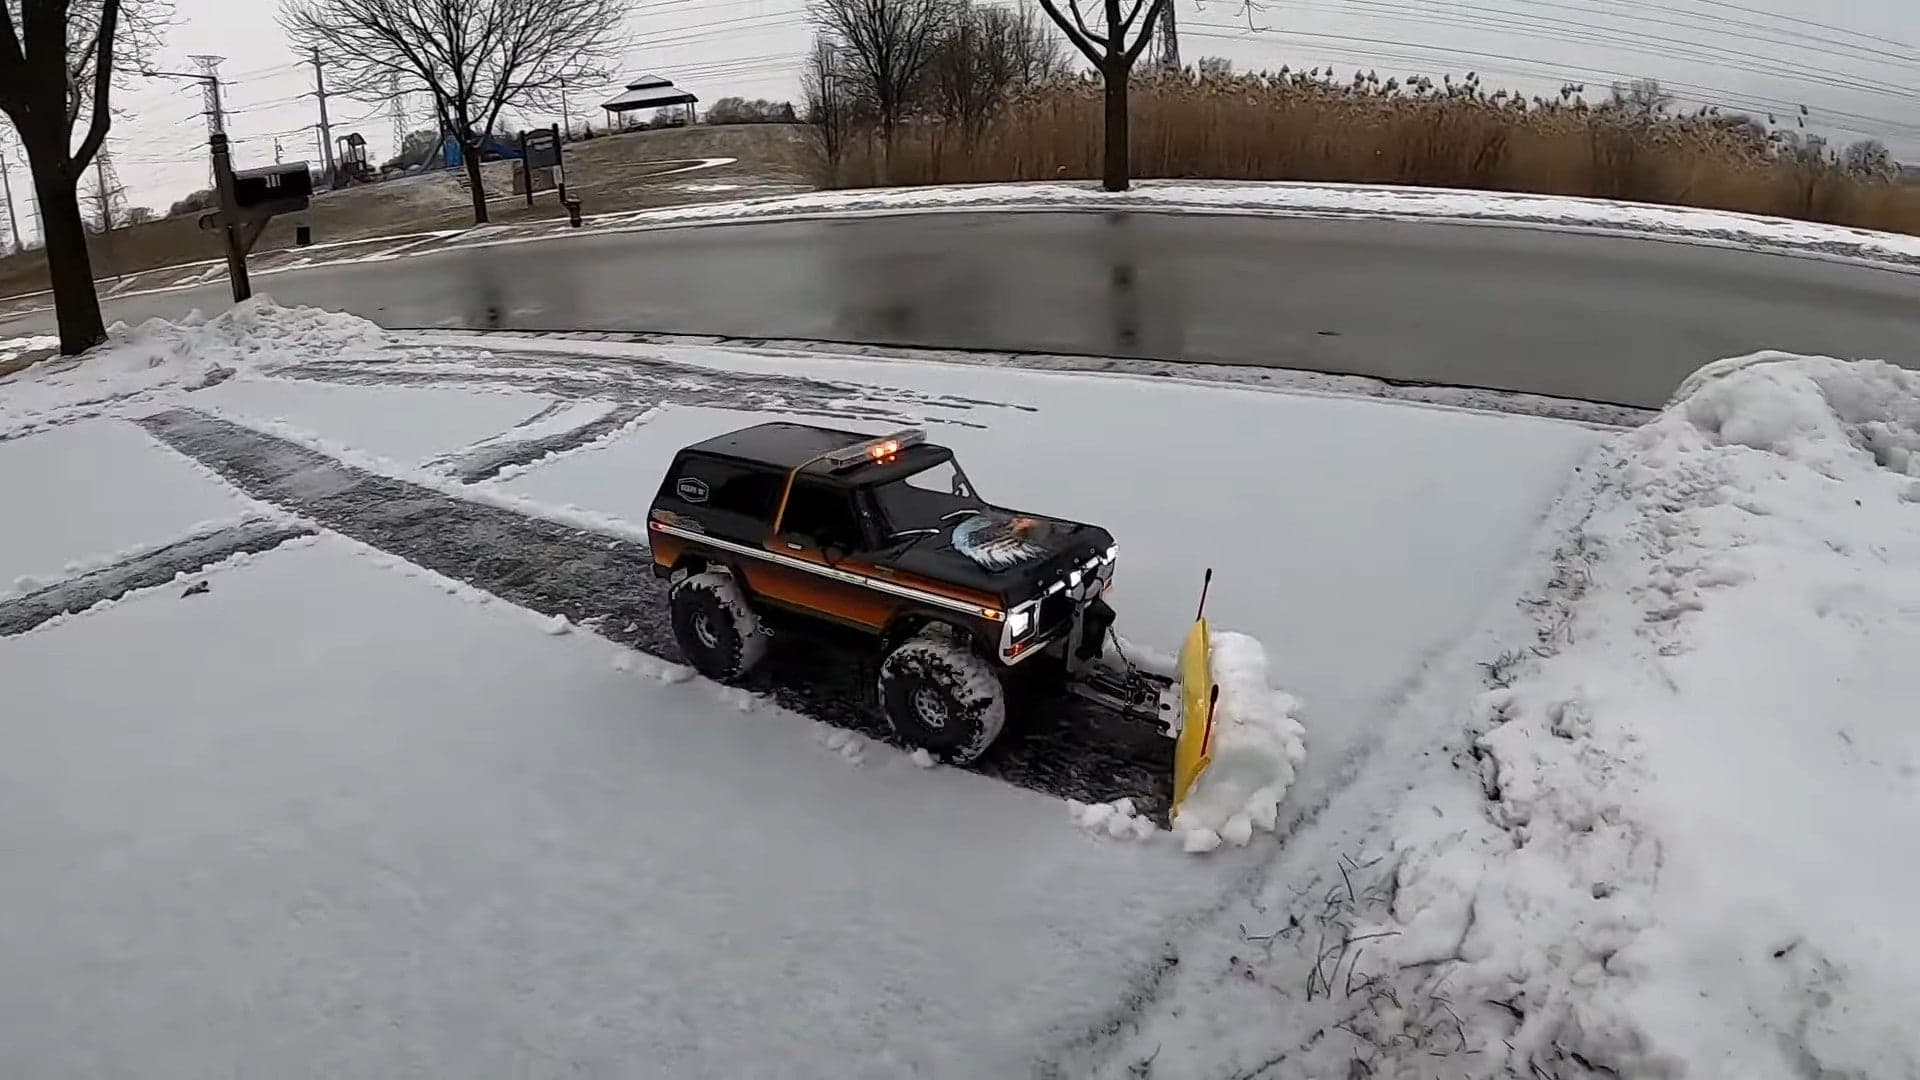 RC Plows and Snowblowers Are the Fun Way to Clear Your Driveway